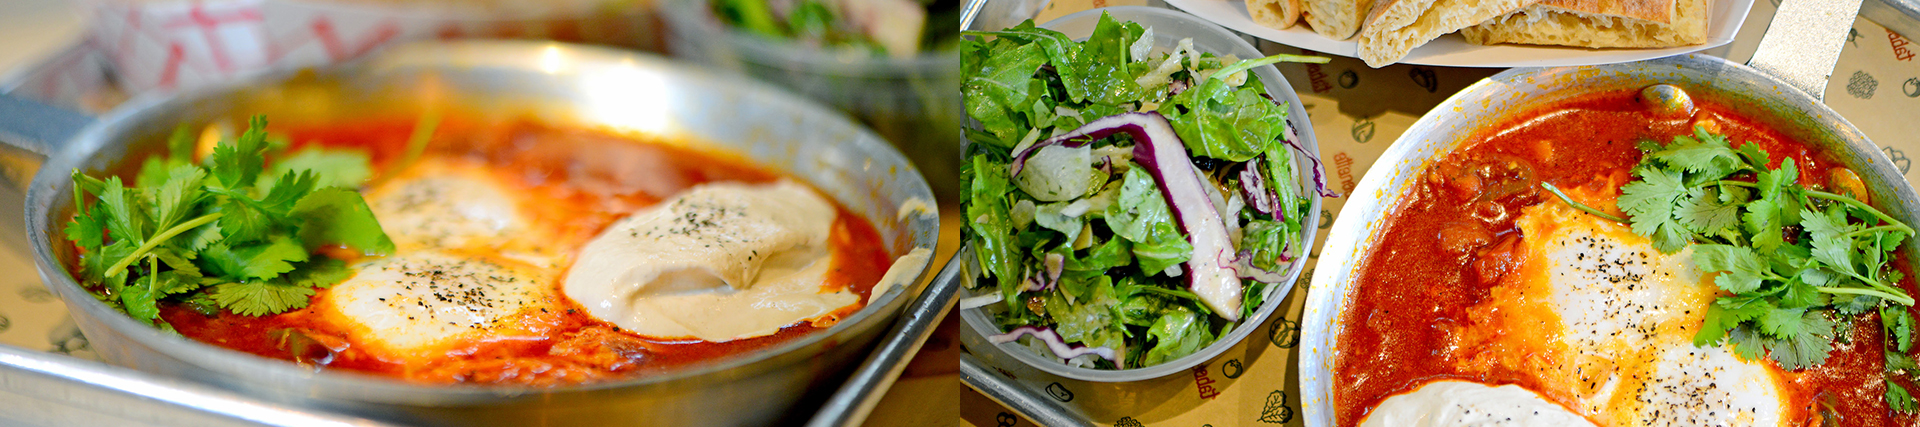 Dish with a tomato base and side salad